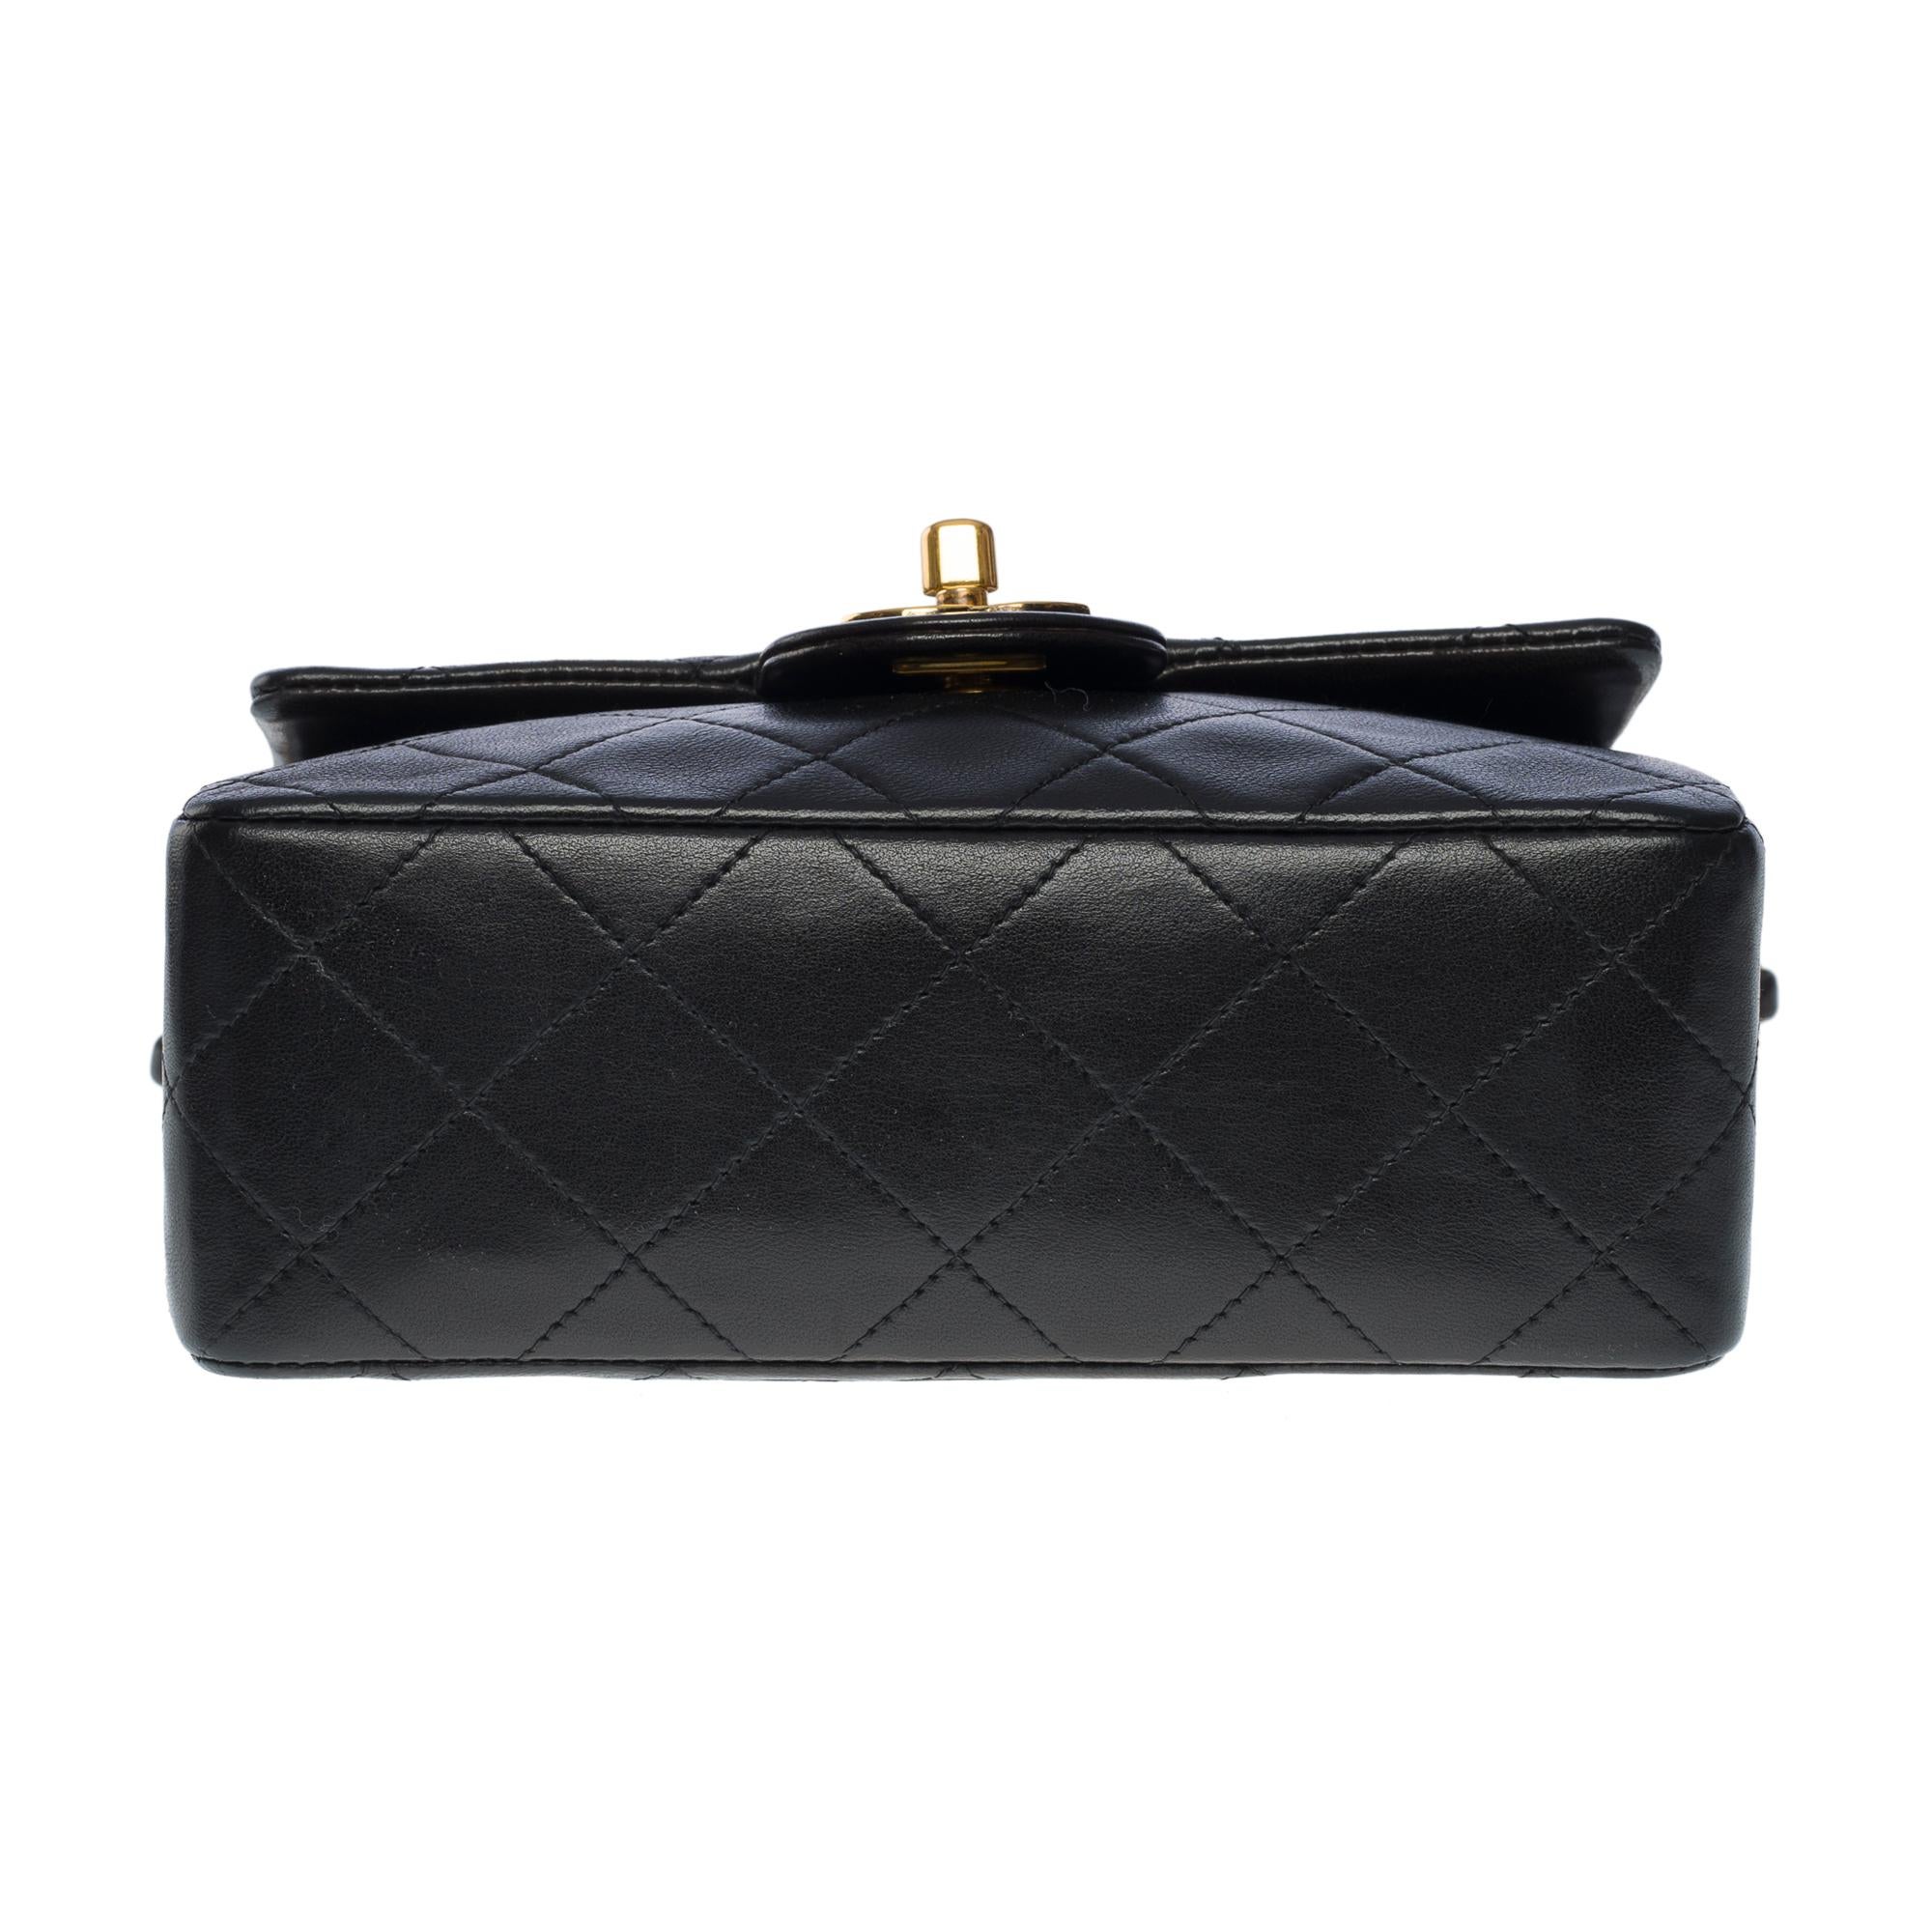 Chanel Timeless Mini Square shoulder Flap bag in black quilted lambskin, GHW 6